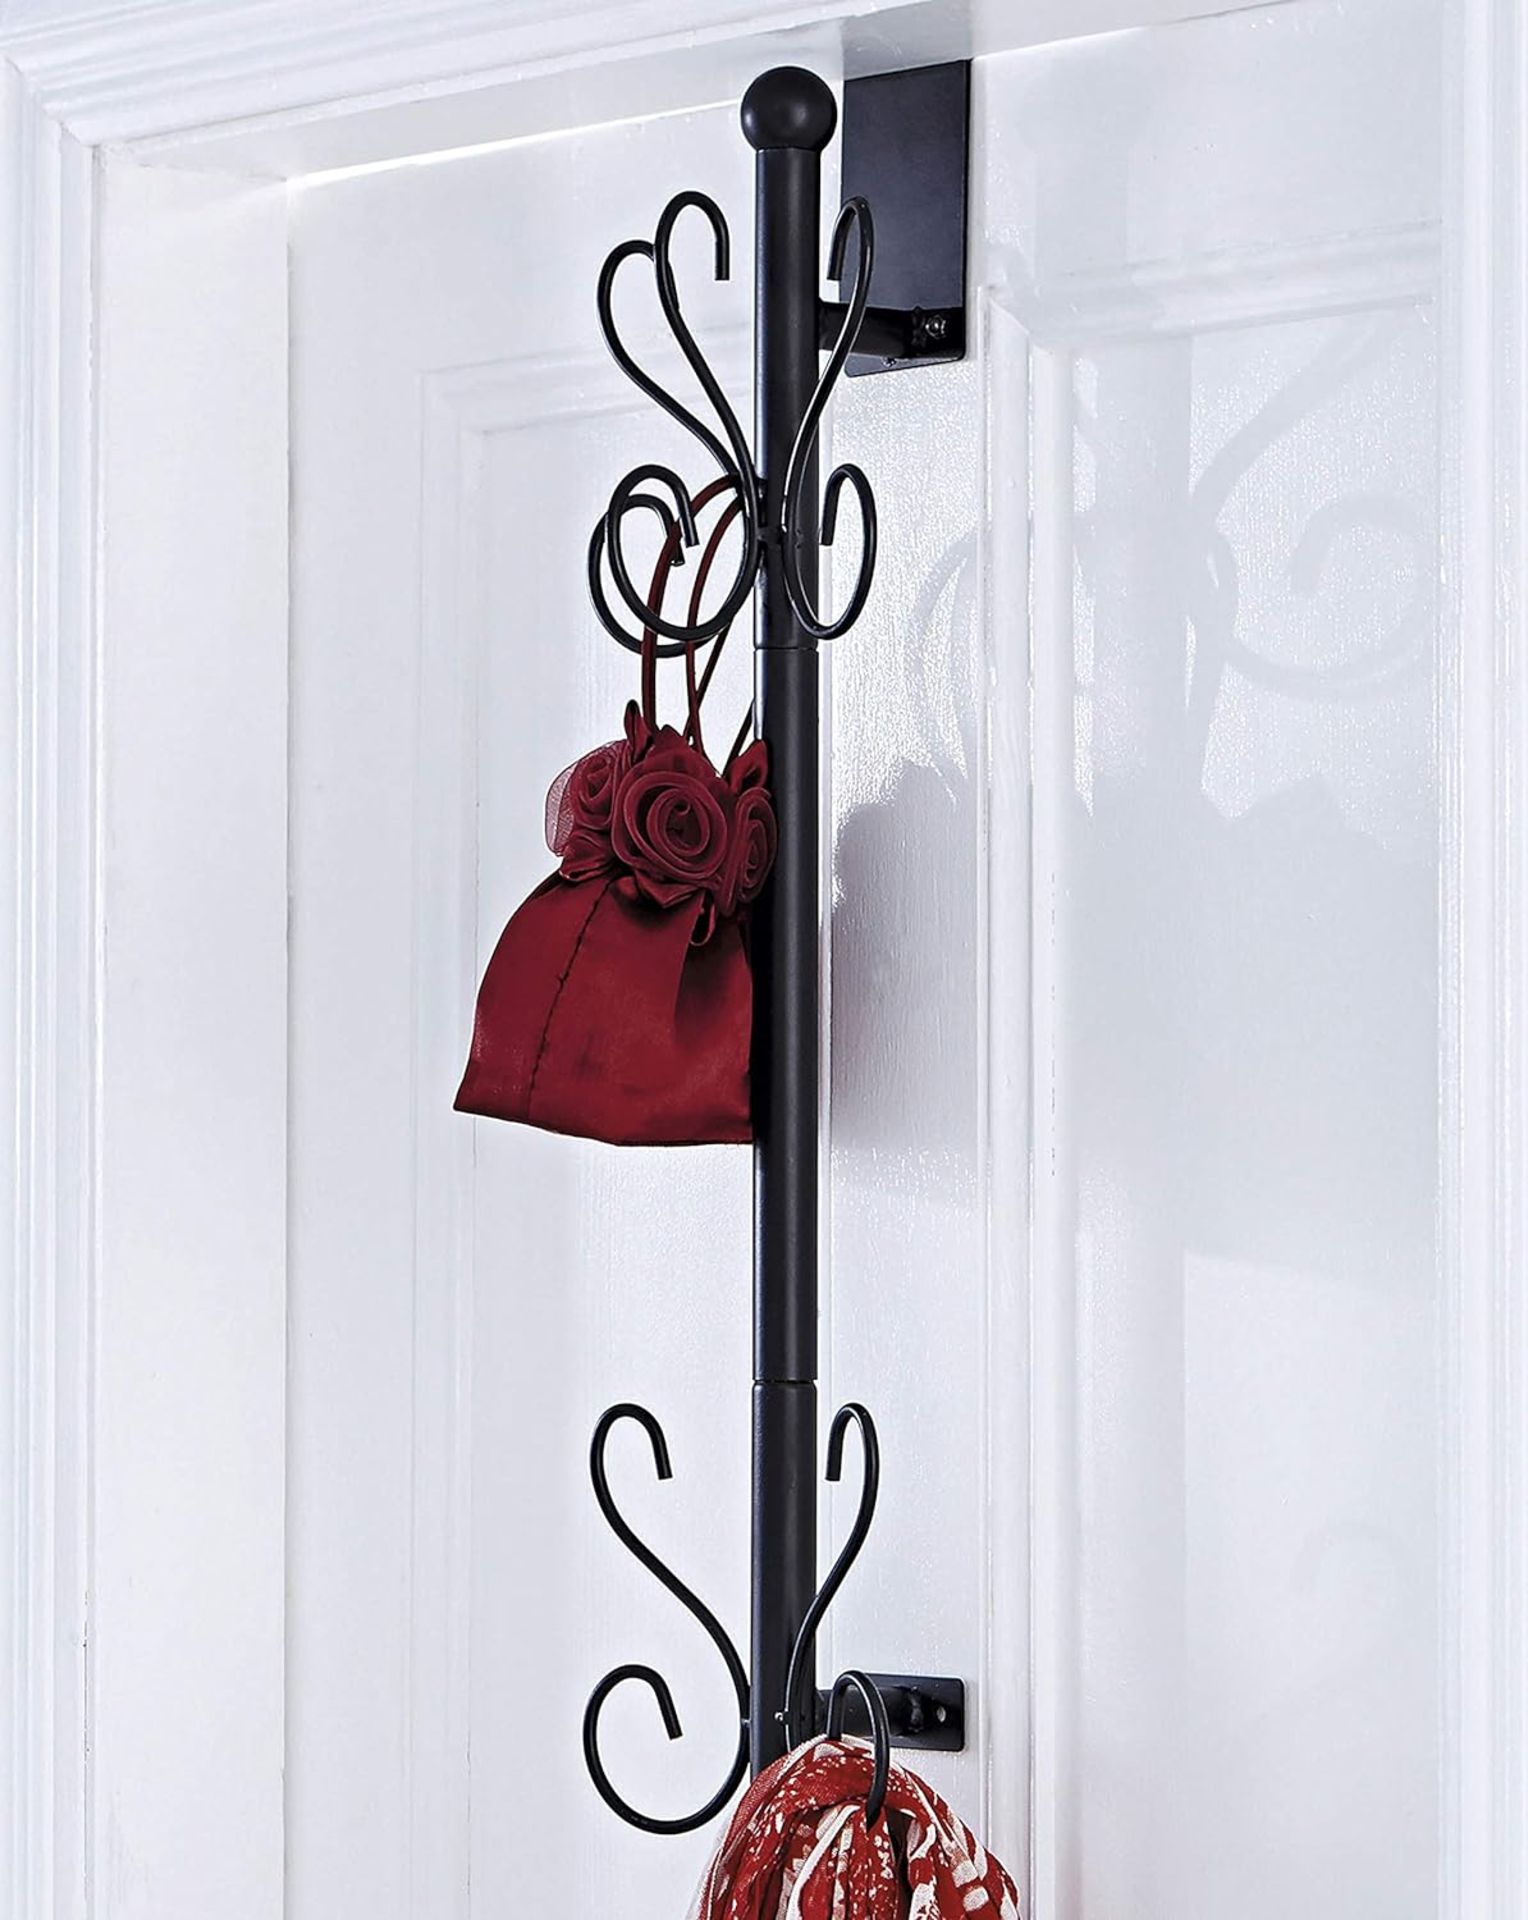 25x BRAND NEW IDEAWORKS Coat Tree Over the Door Wall Mount. RRP £9.99 EACH.Organize your home with